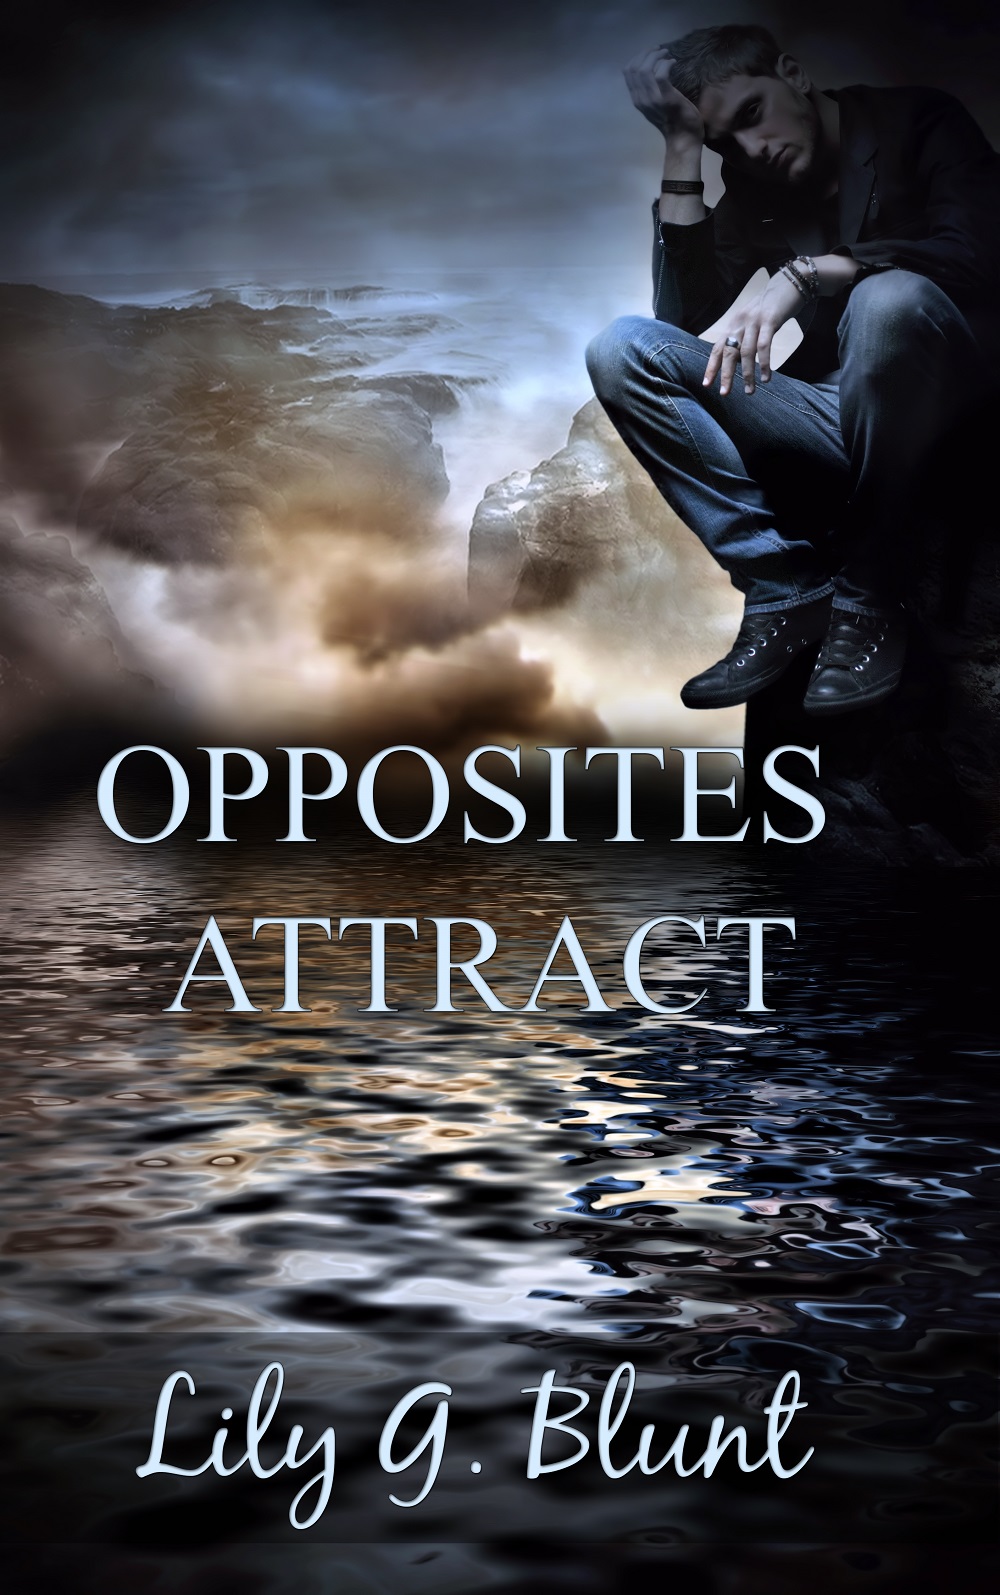 Opposites Attract (2015) Main Poster